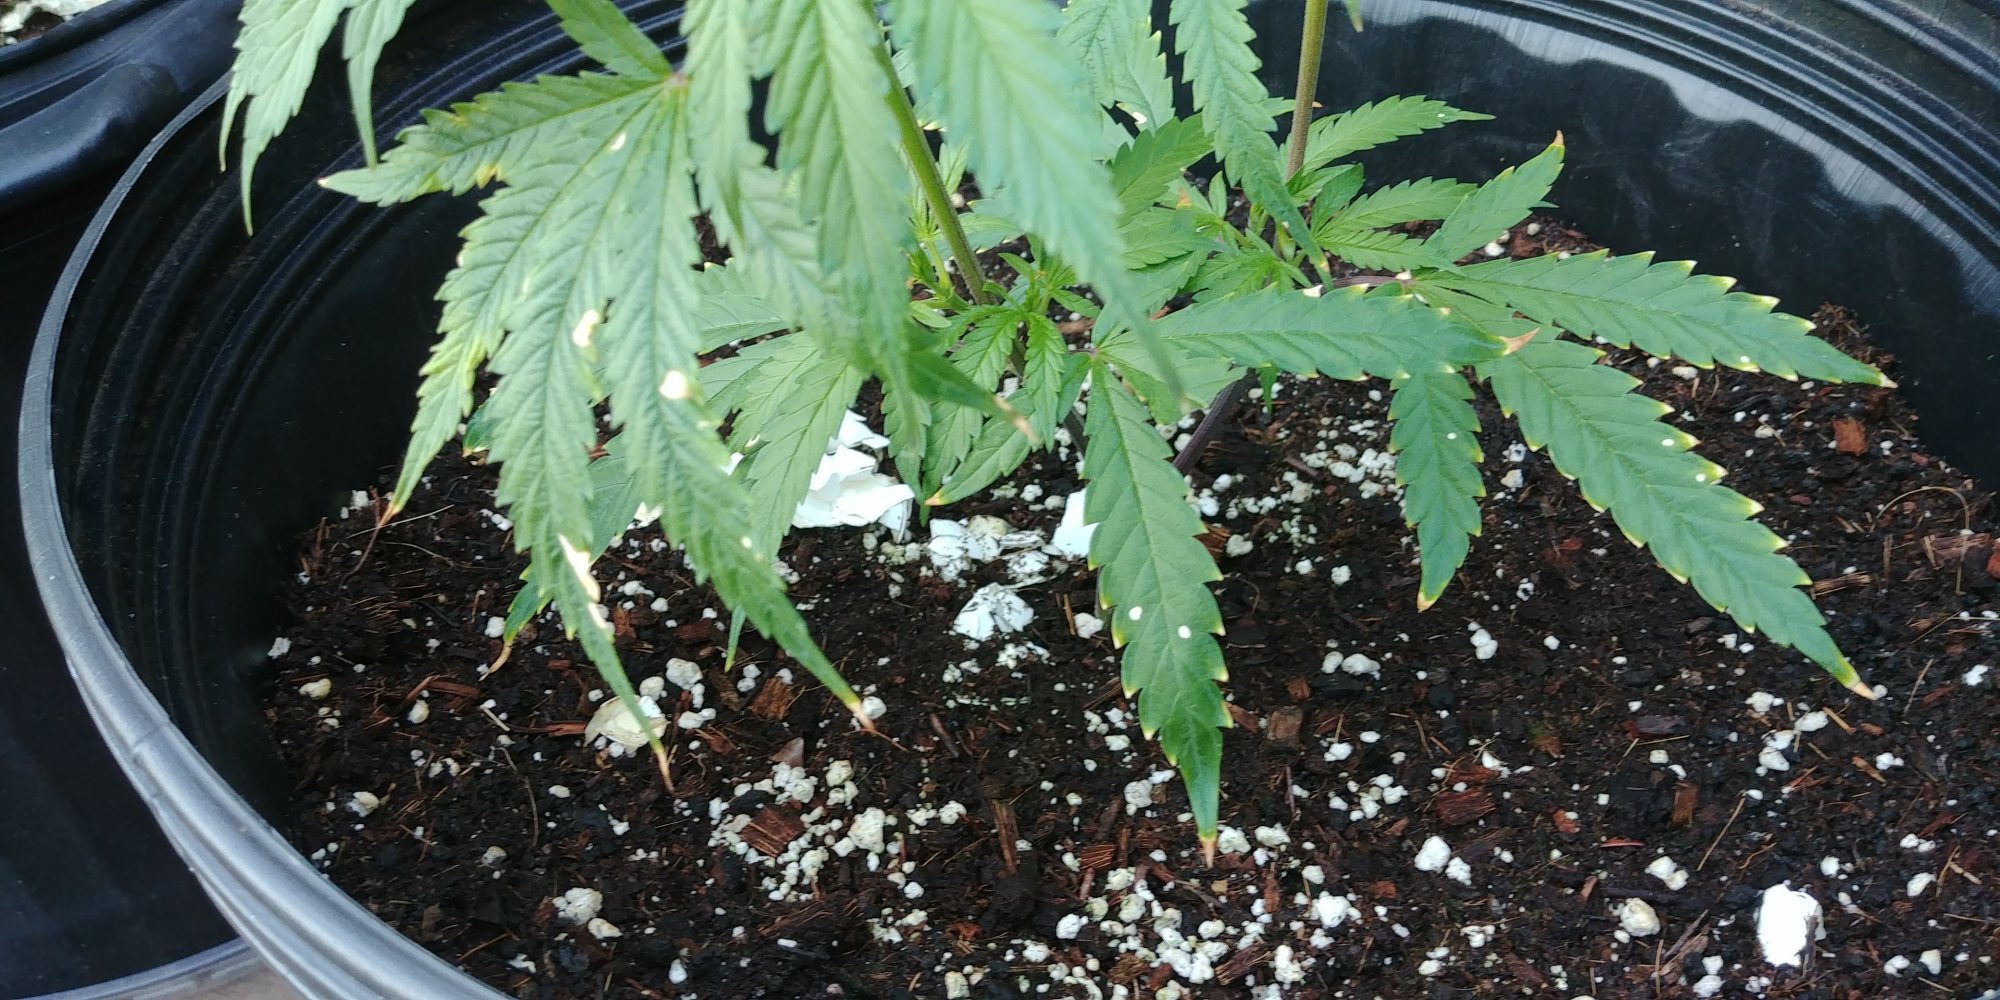 White spots need second opinion 5